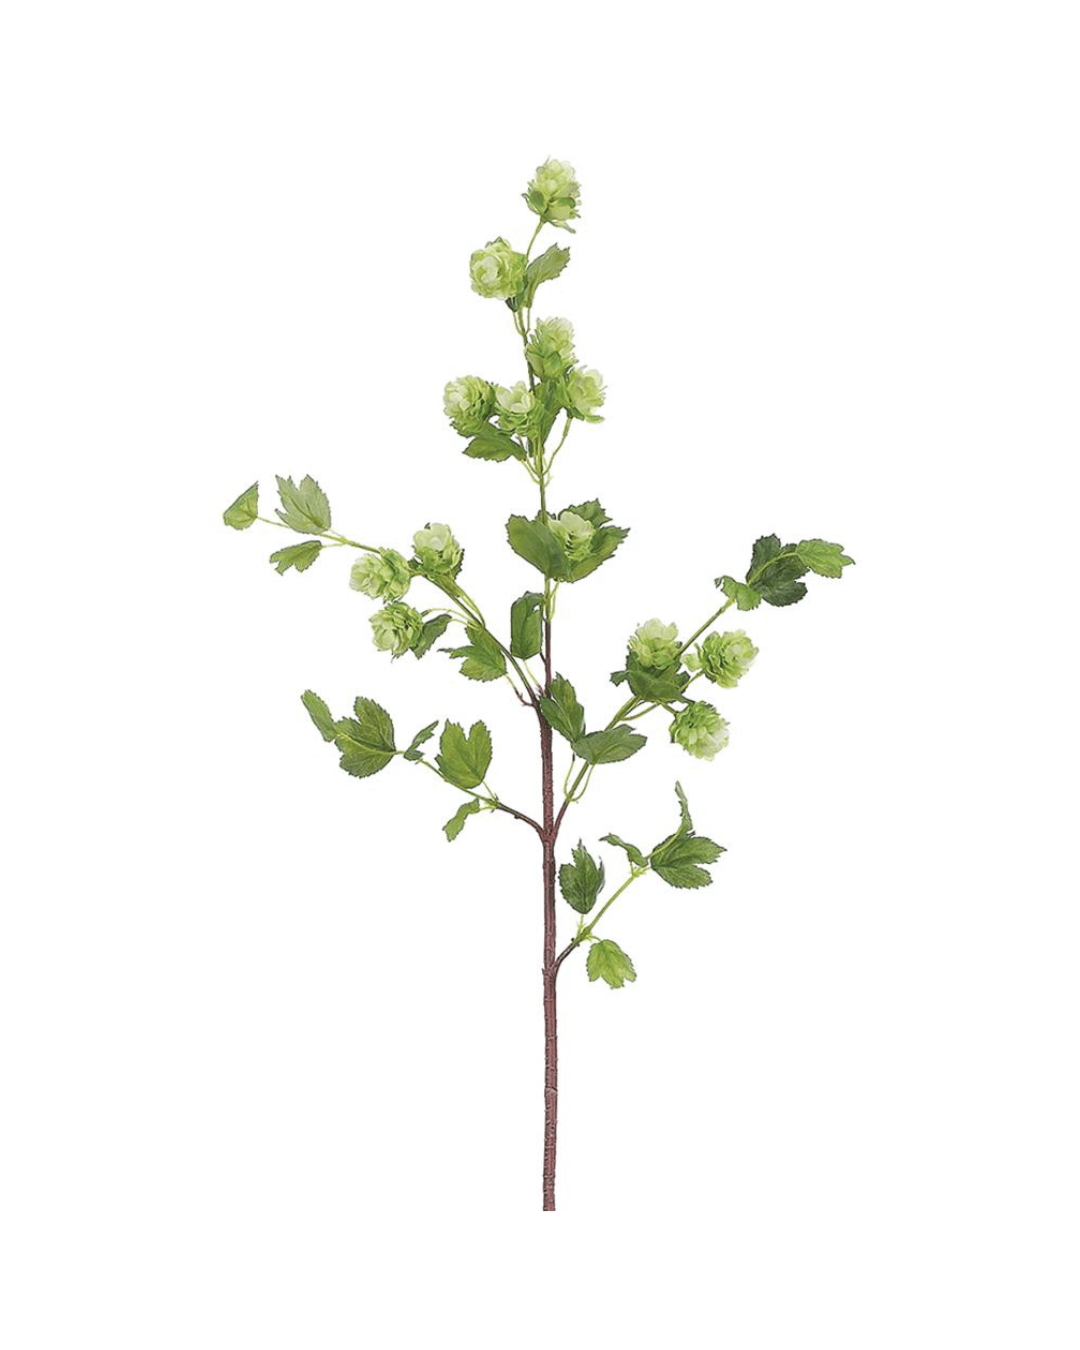 A single, slender tree branch with lush green leaves and clusters of tiny green buds against a plain white background typical of a Scottsdale, Arizona bungalow garden from AllState Floral And Craft's 36" Hop Spray.